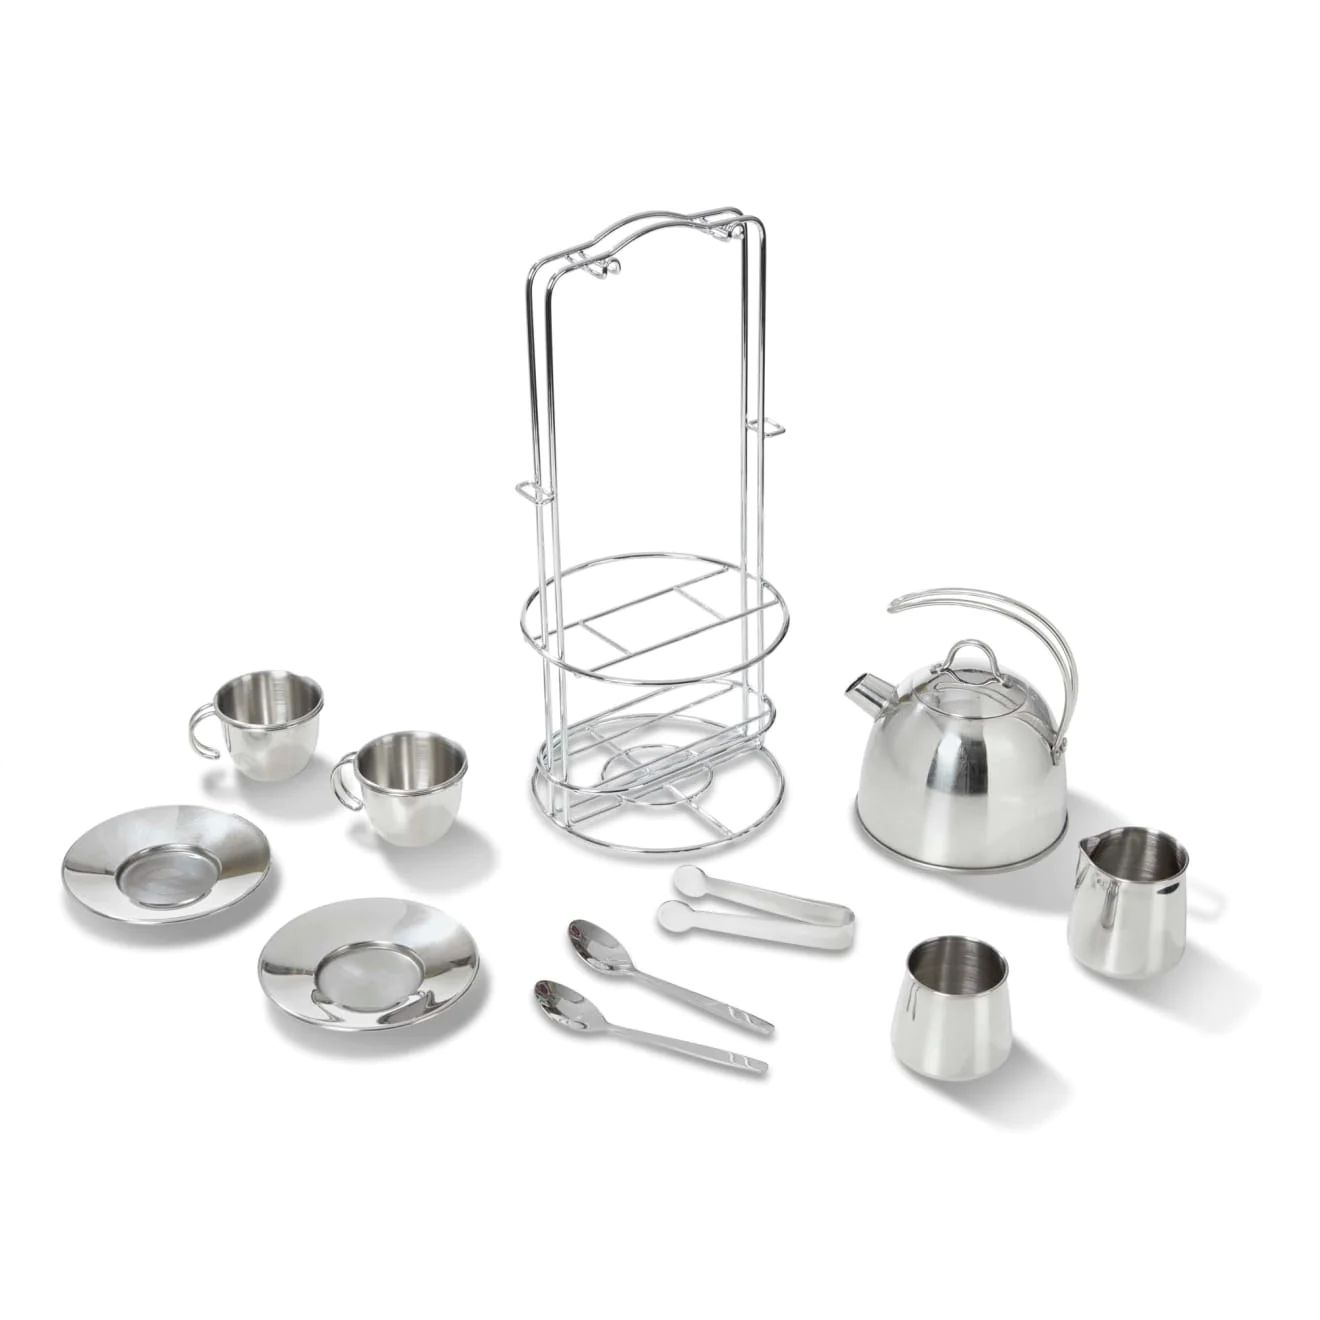 Stainless Steel Tea Set and Storage Stand | Melissa and Doug